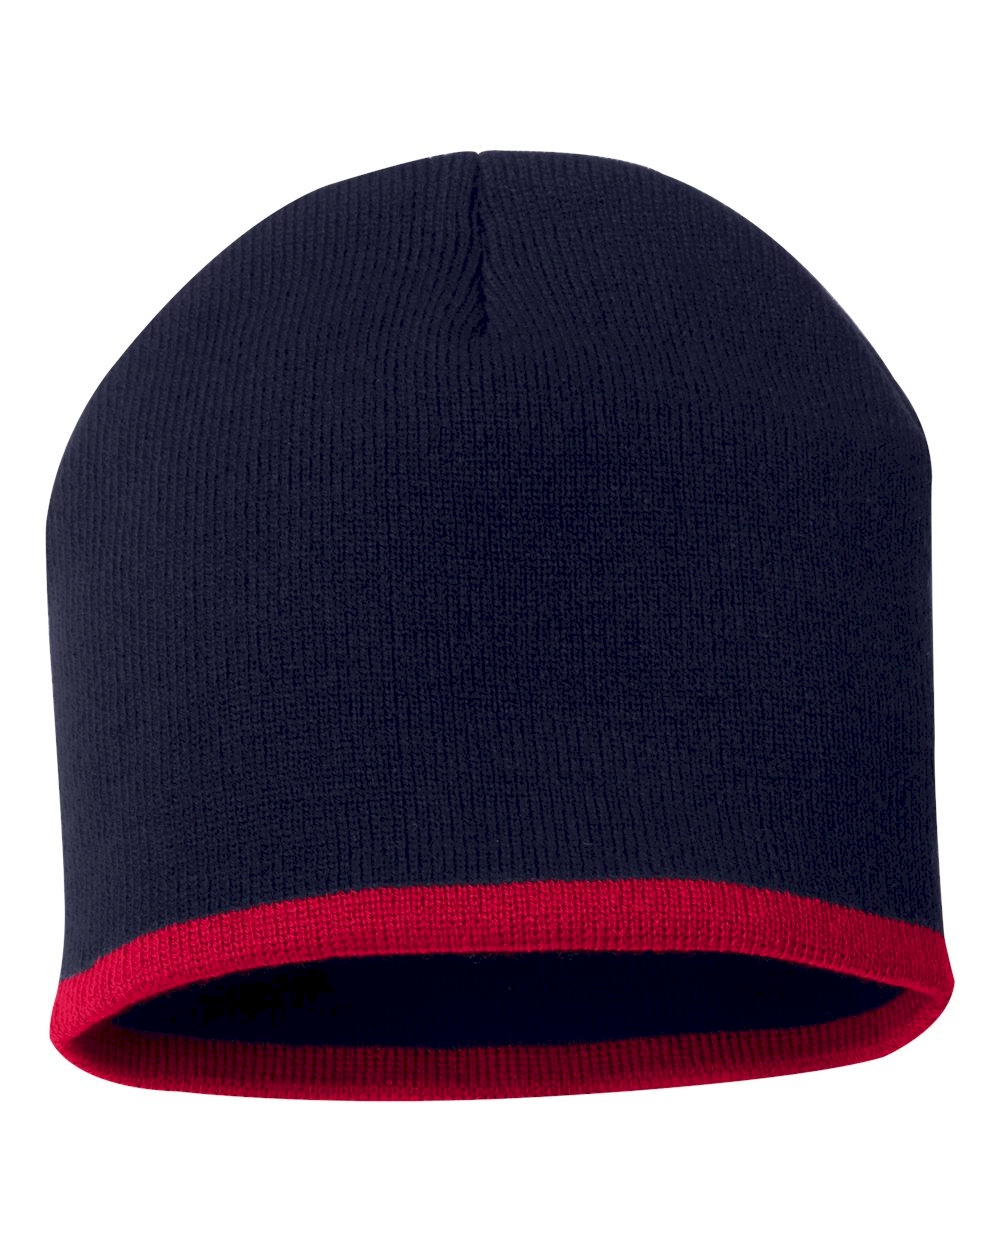 8" Knit Beanie with Striped Bottom Embroidery Blanks - NAVY/RED